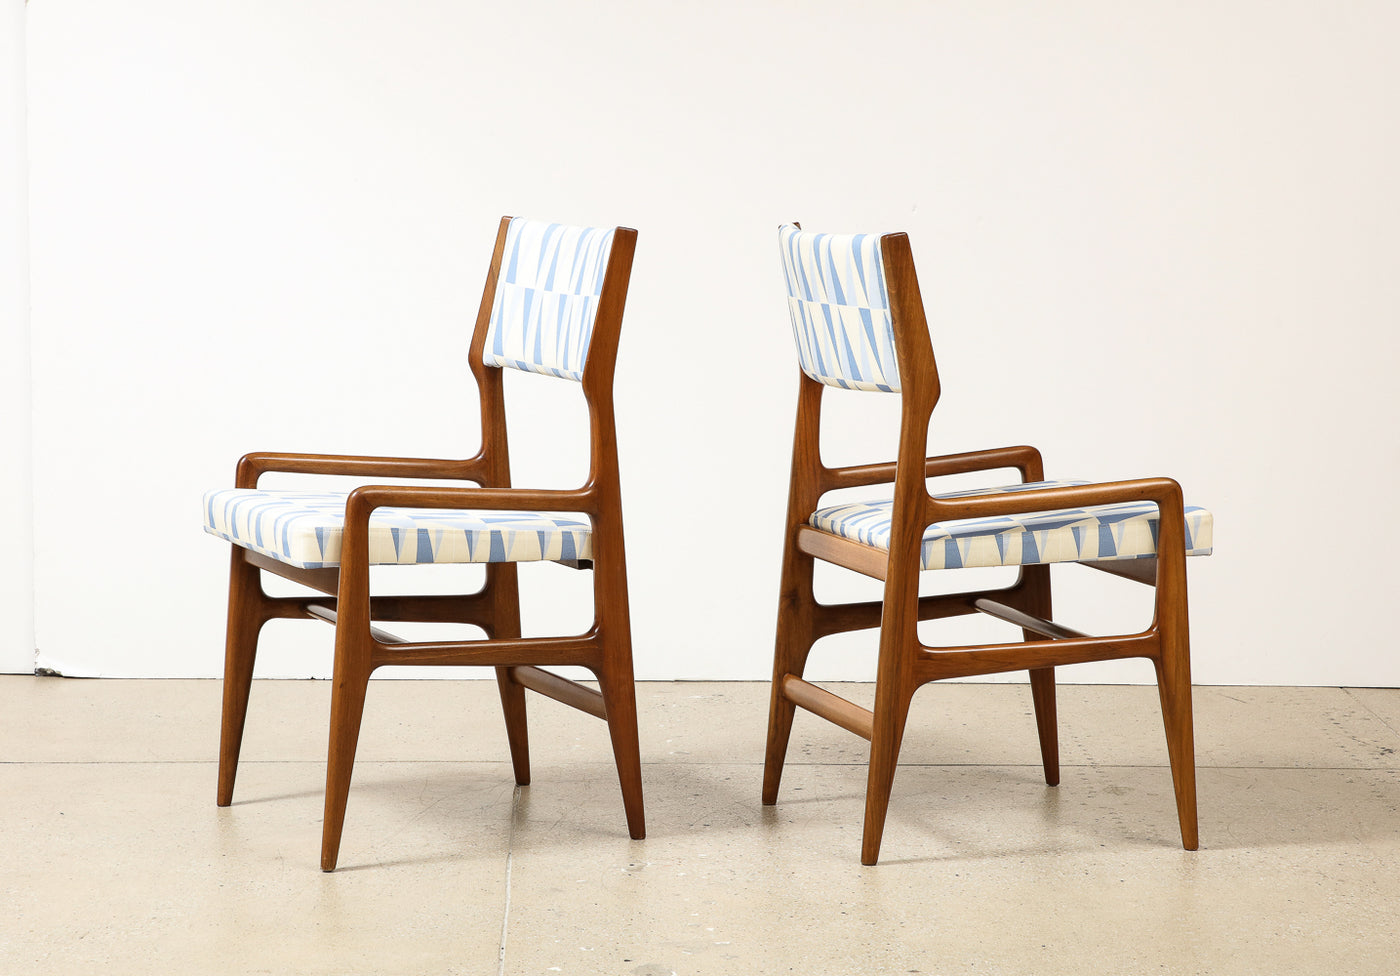 No. 676 Side Chairs by Gio Ponti